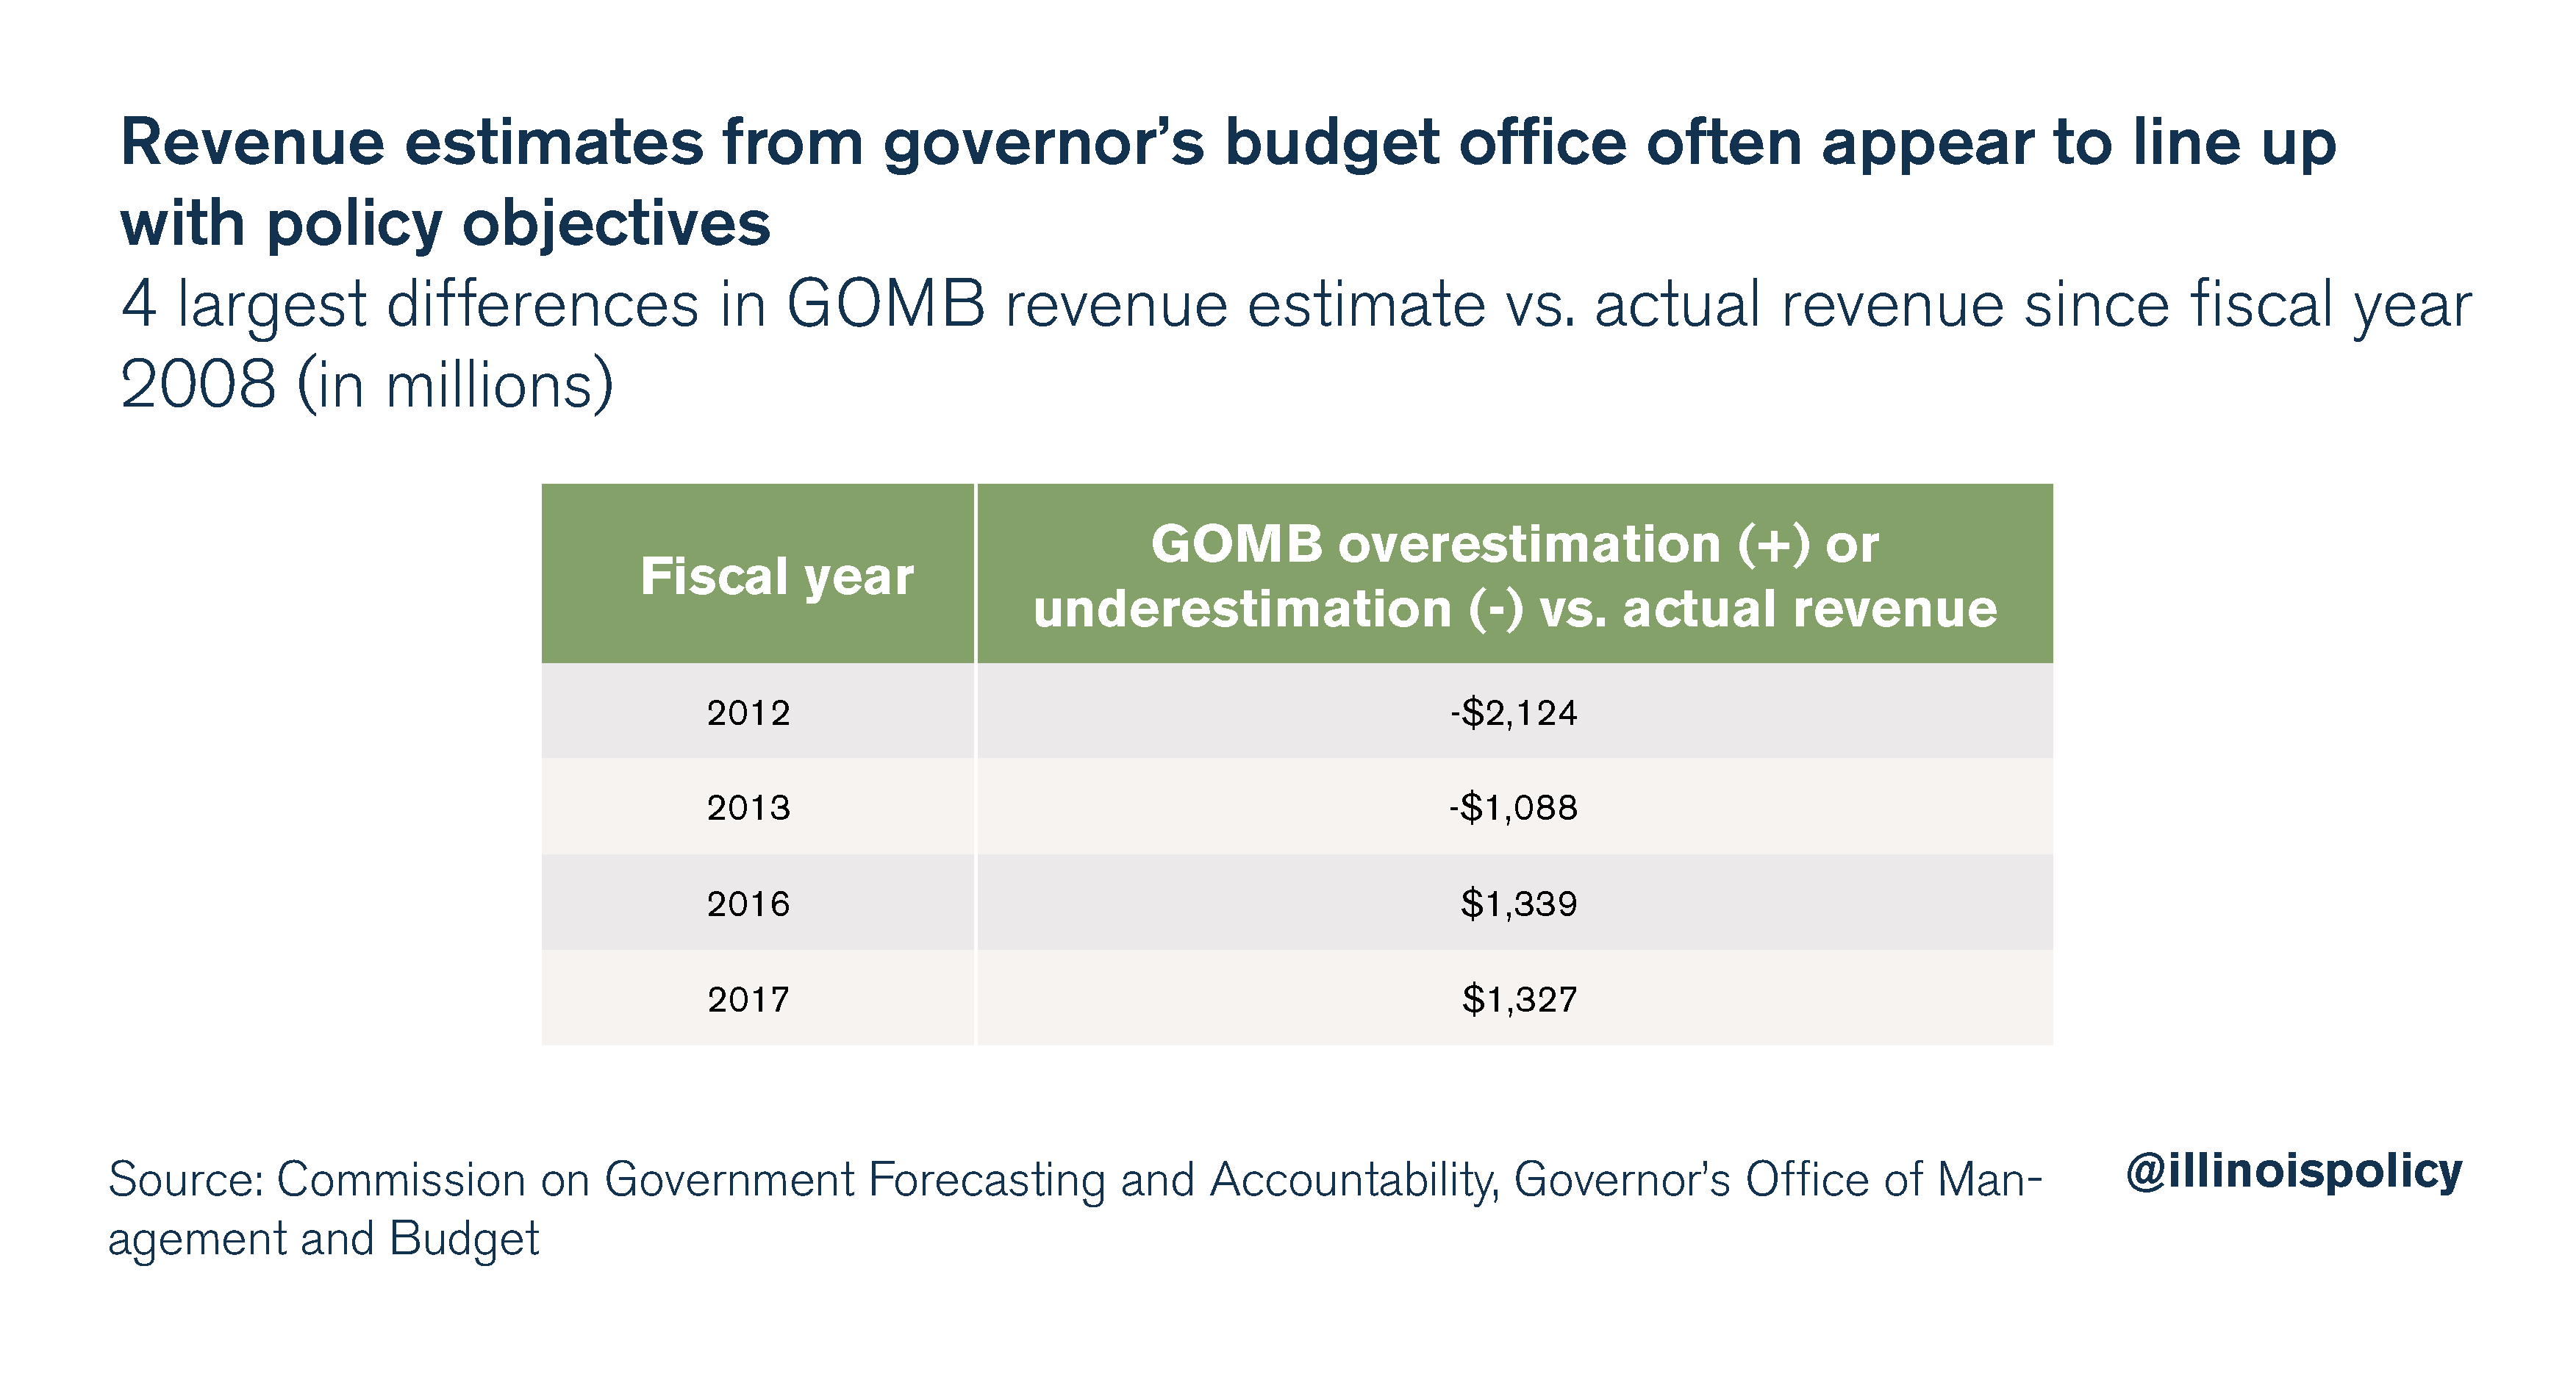 Revenue estimates from the governor's budget office often appear to line up with policy objectives